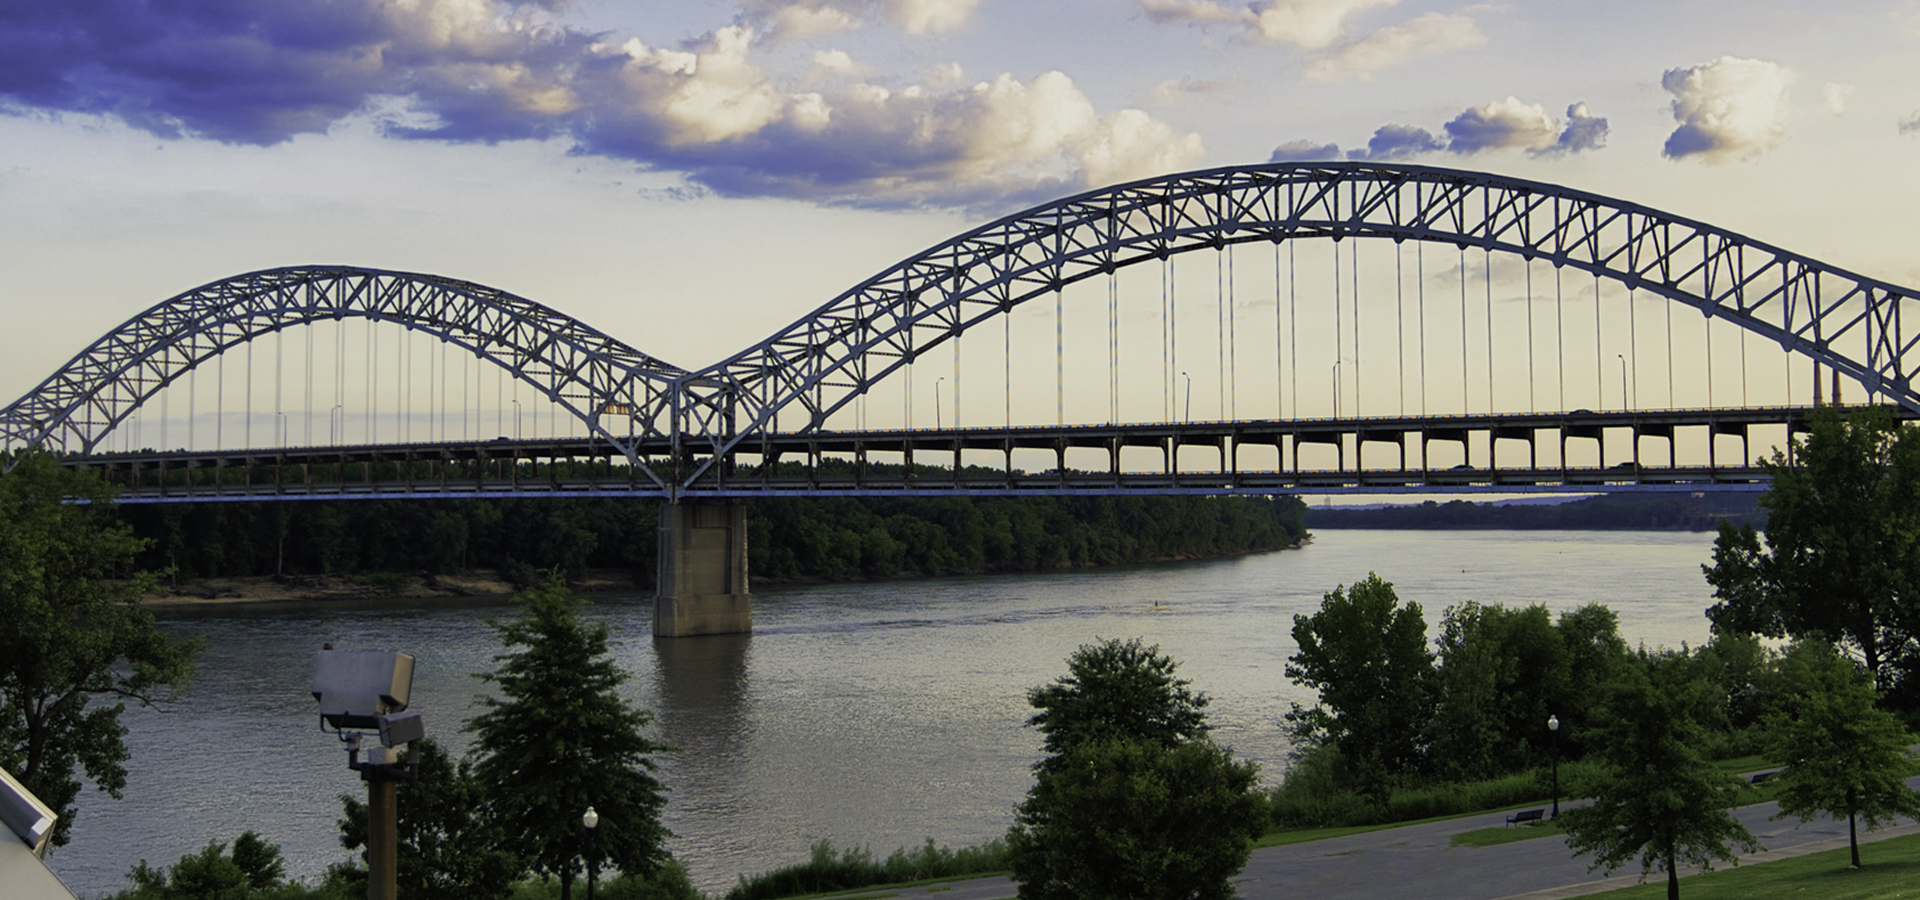 Image of Sherman Minton Bridge from New Albany, IN